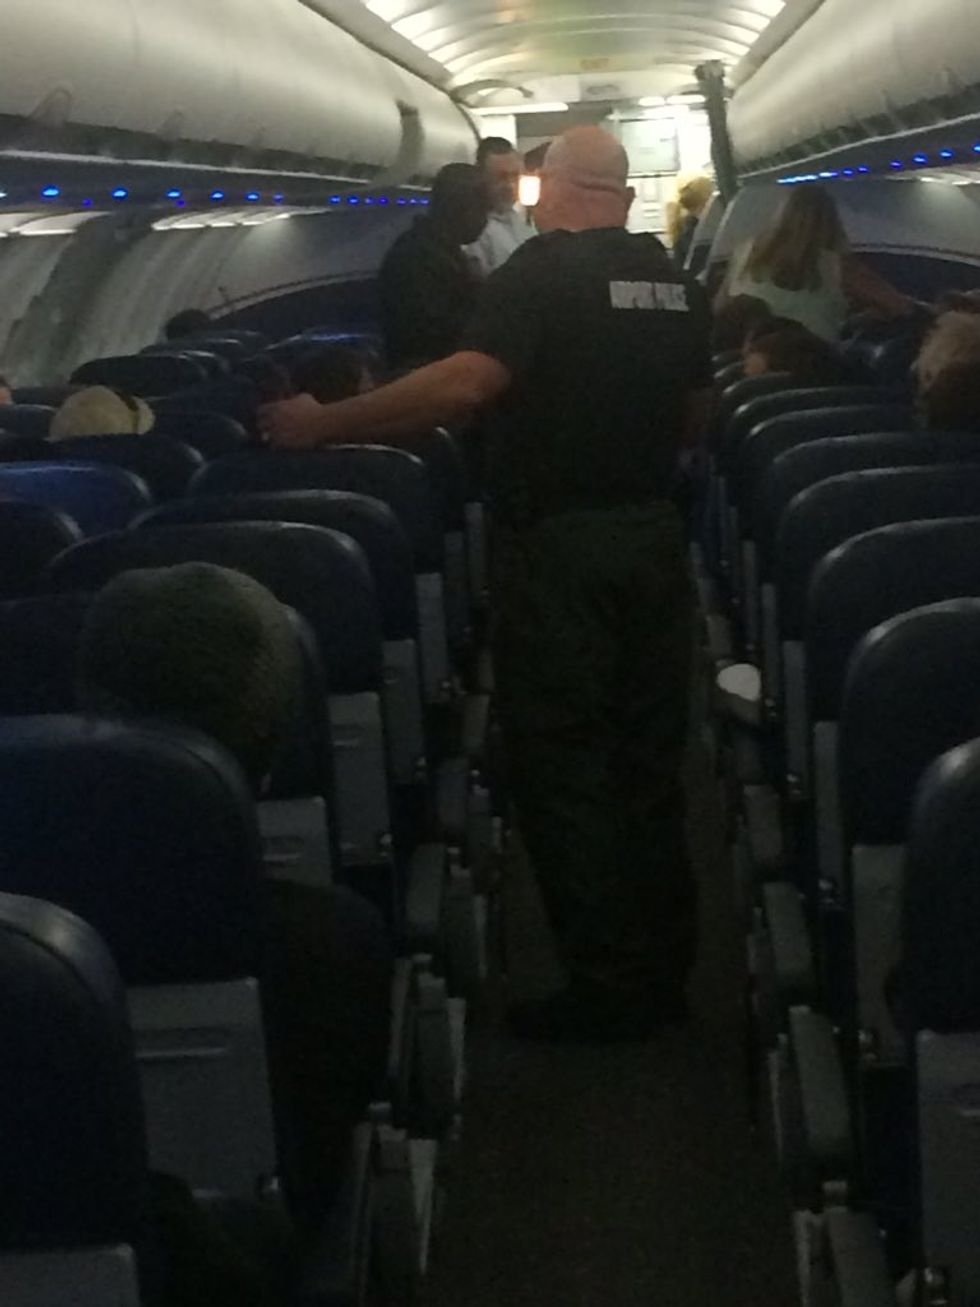 American Airlines Flight Diverted to Wichita After Passenger Allegedly Makes Threats to 'Kill People